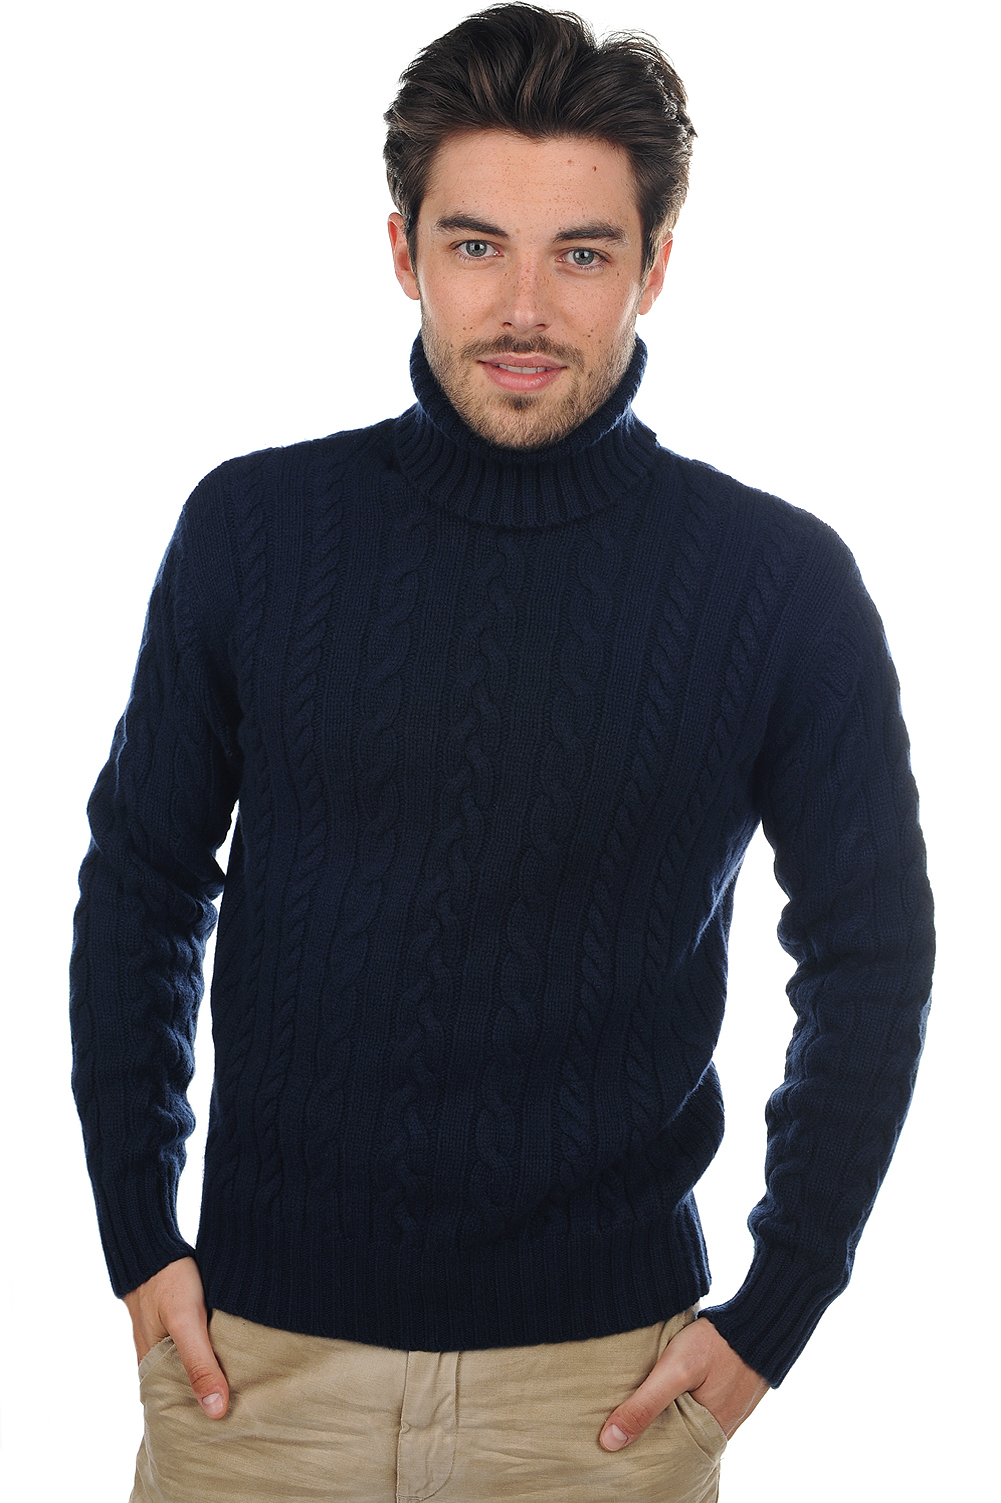 Cachemire pull homme lucas marine fonce 2xl